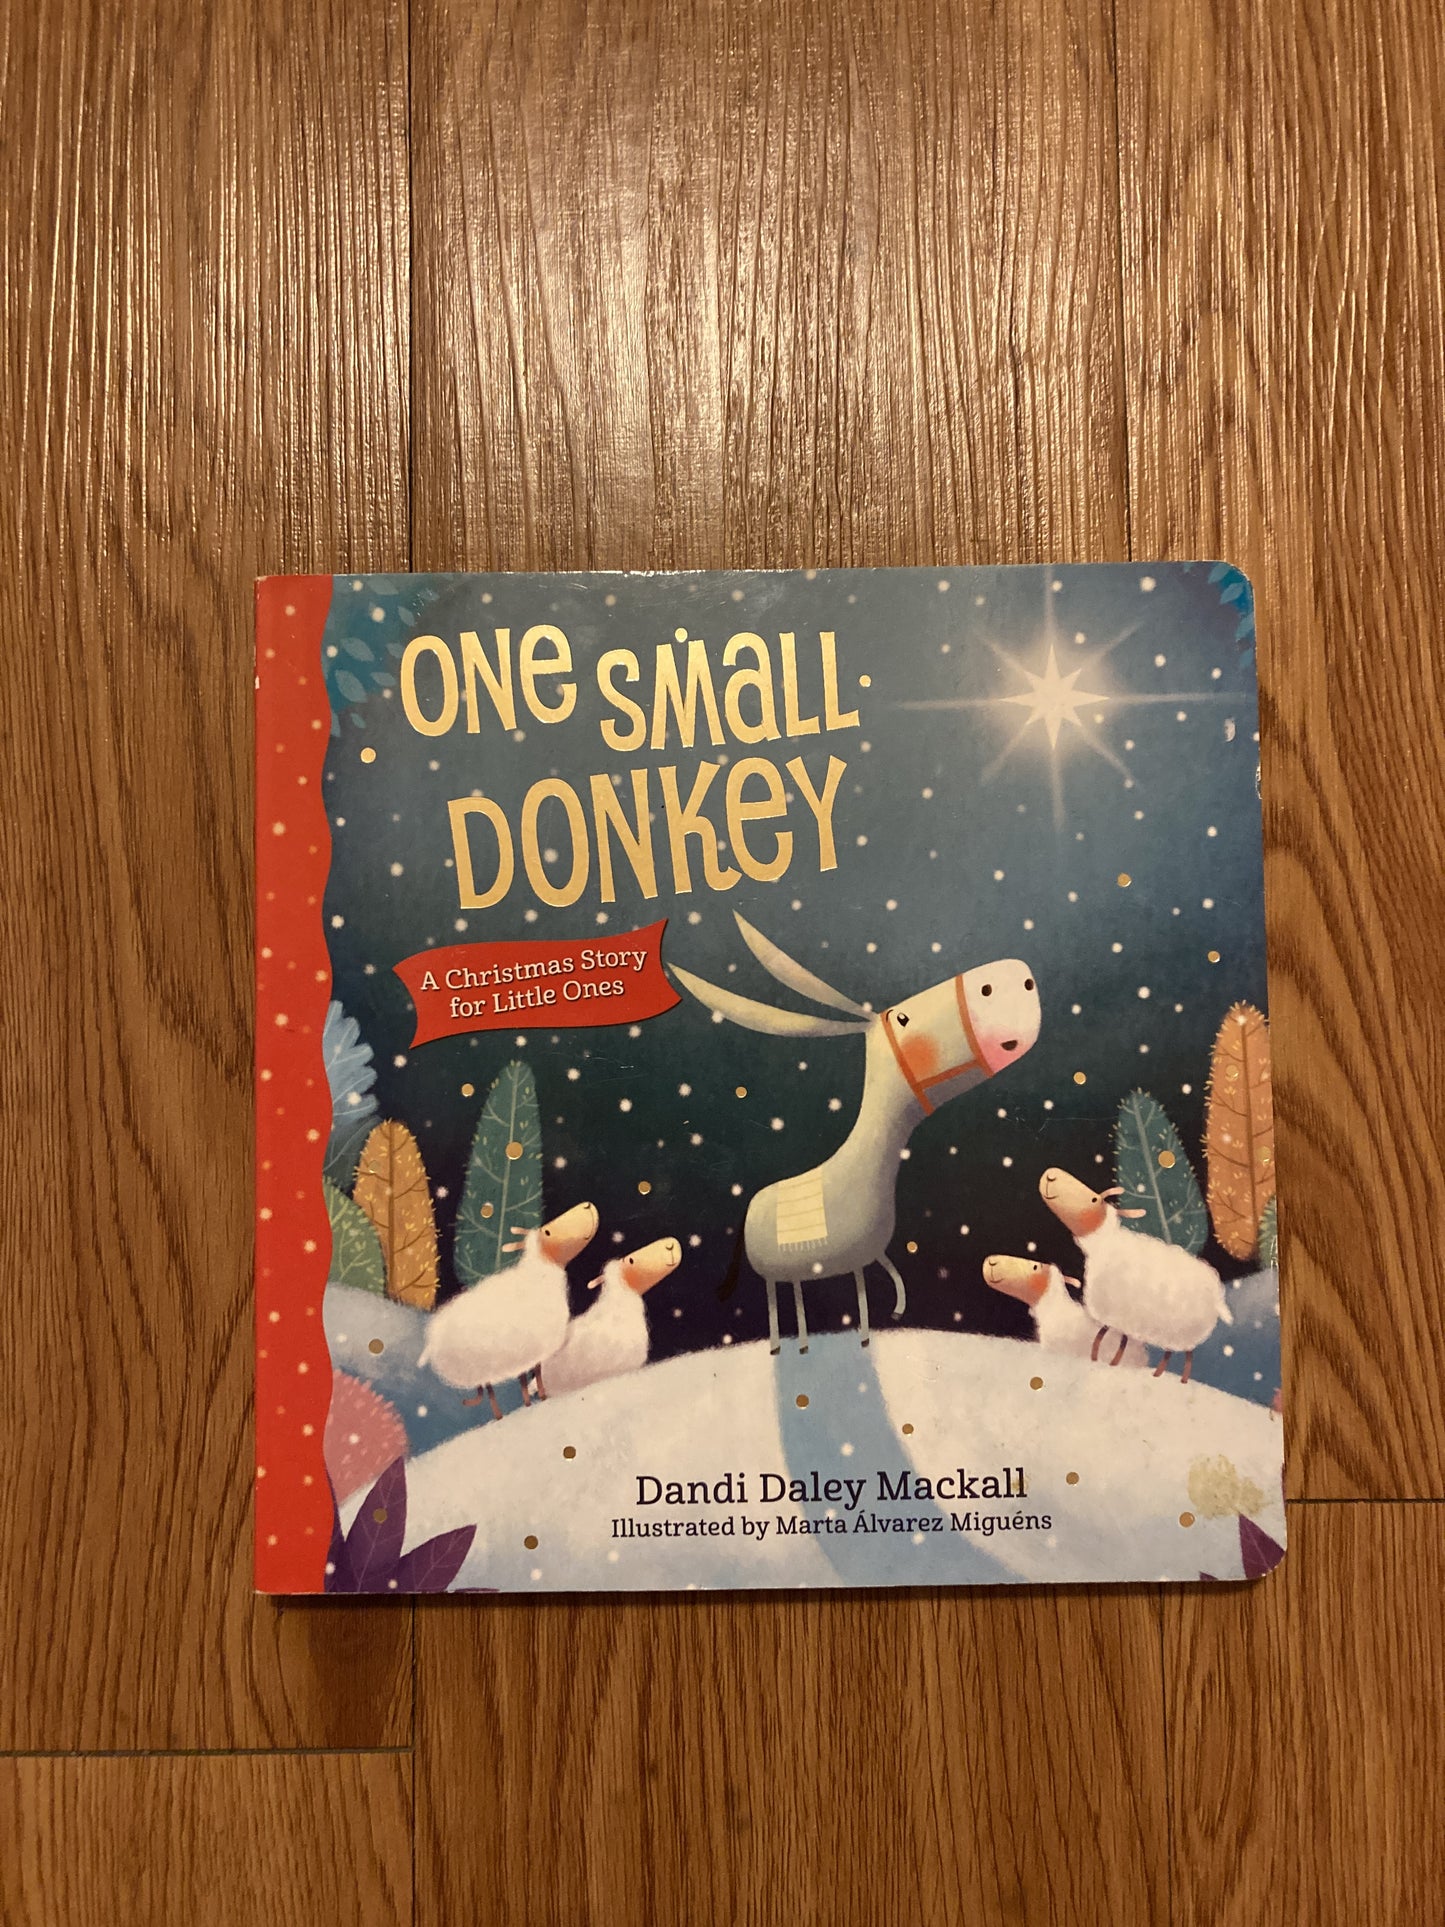 One Small Donkey for Little Ones: A Christmas Story